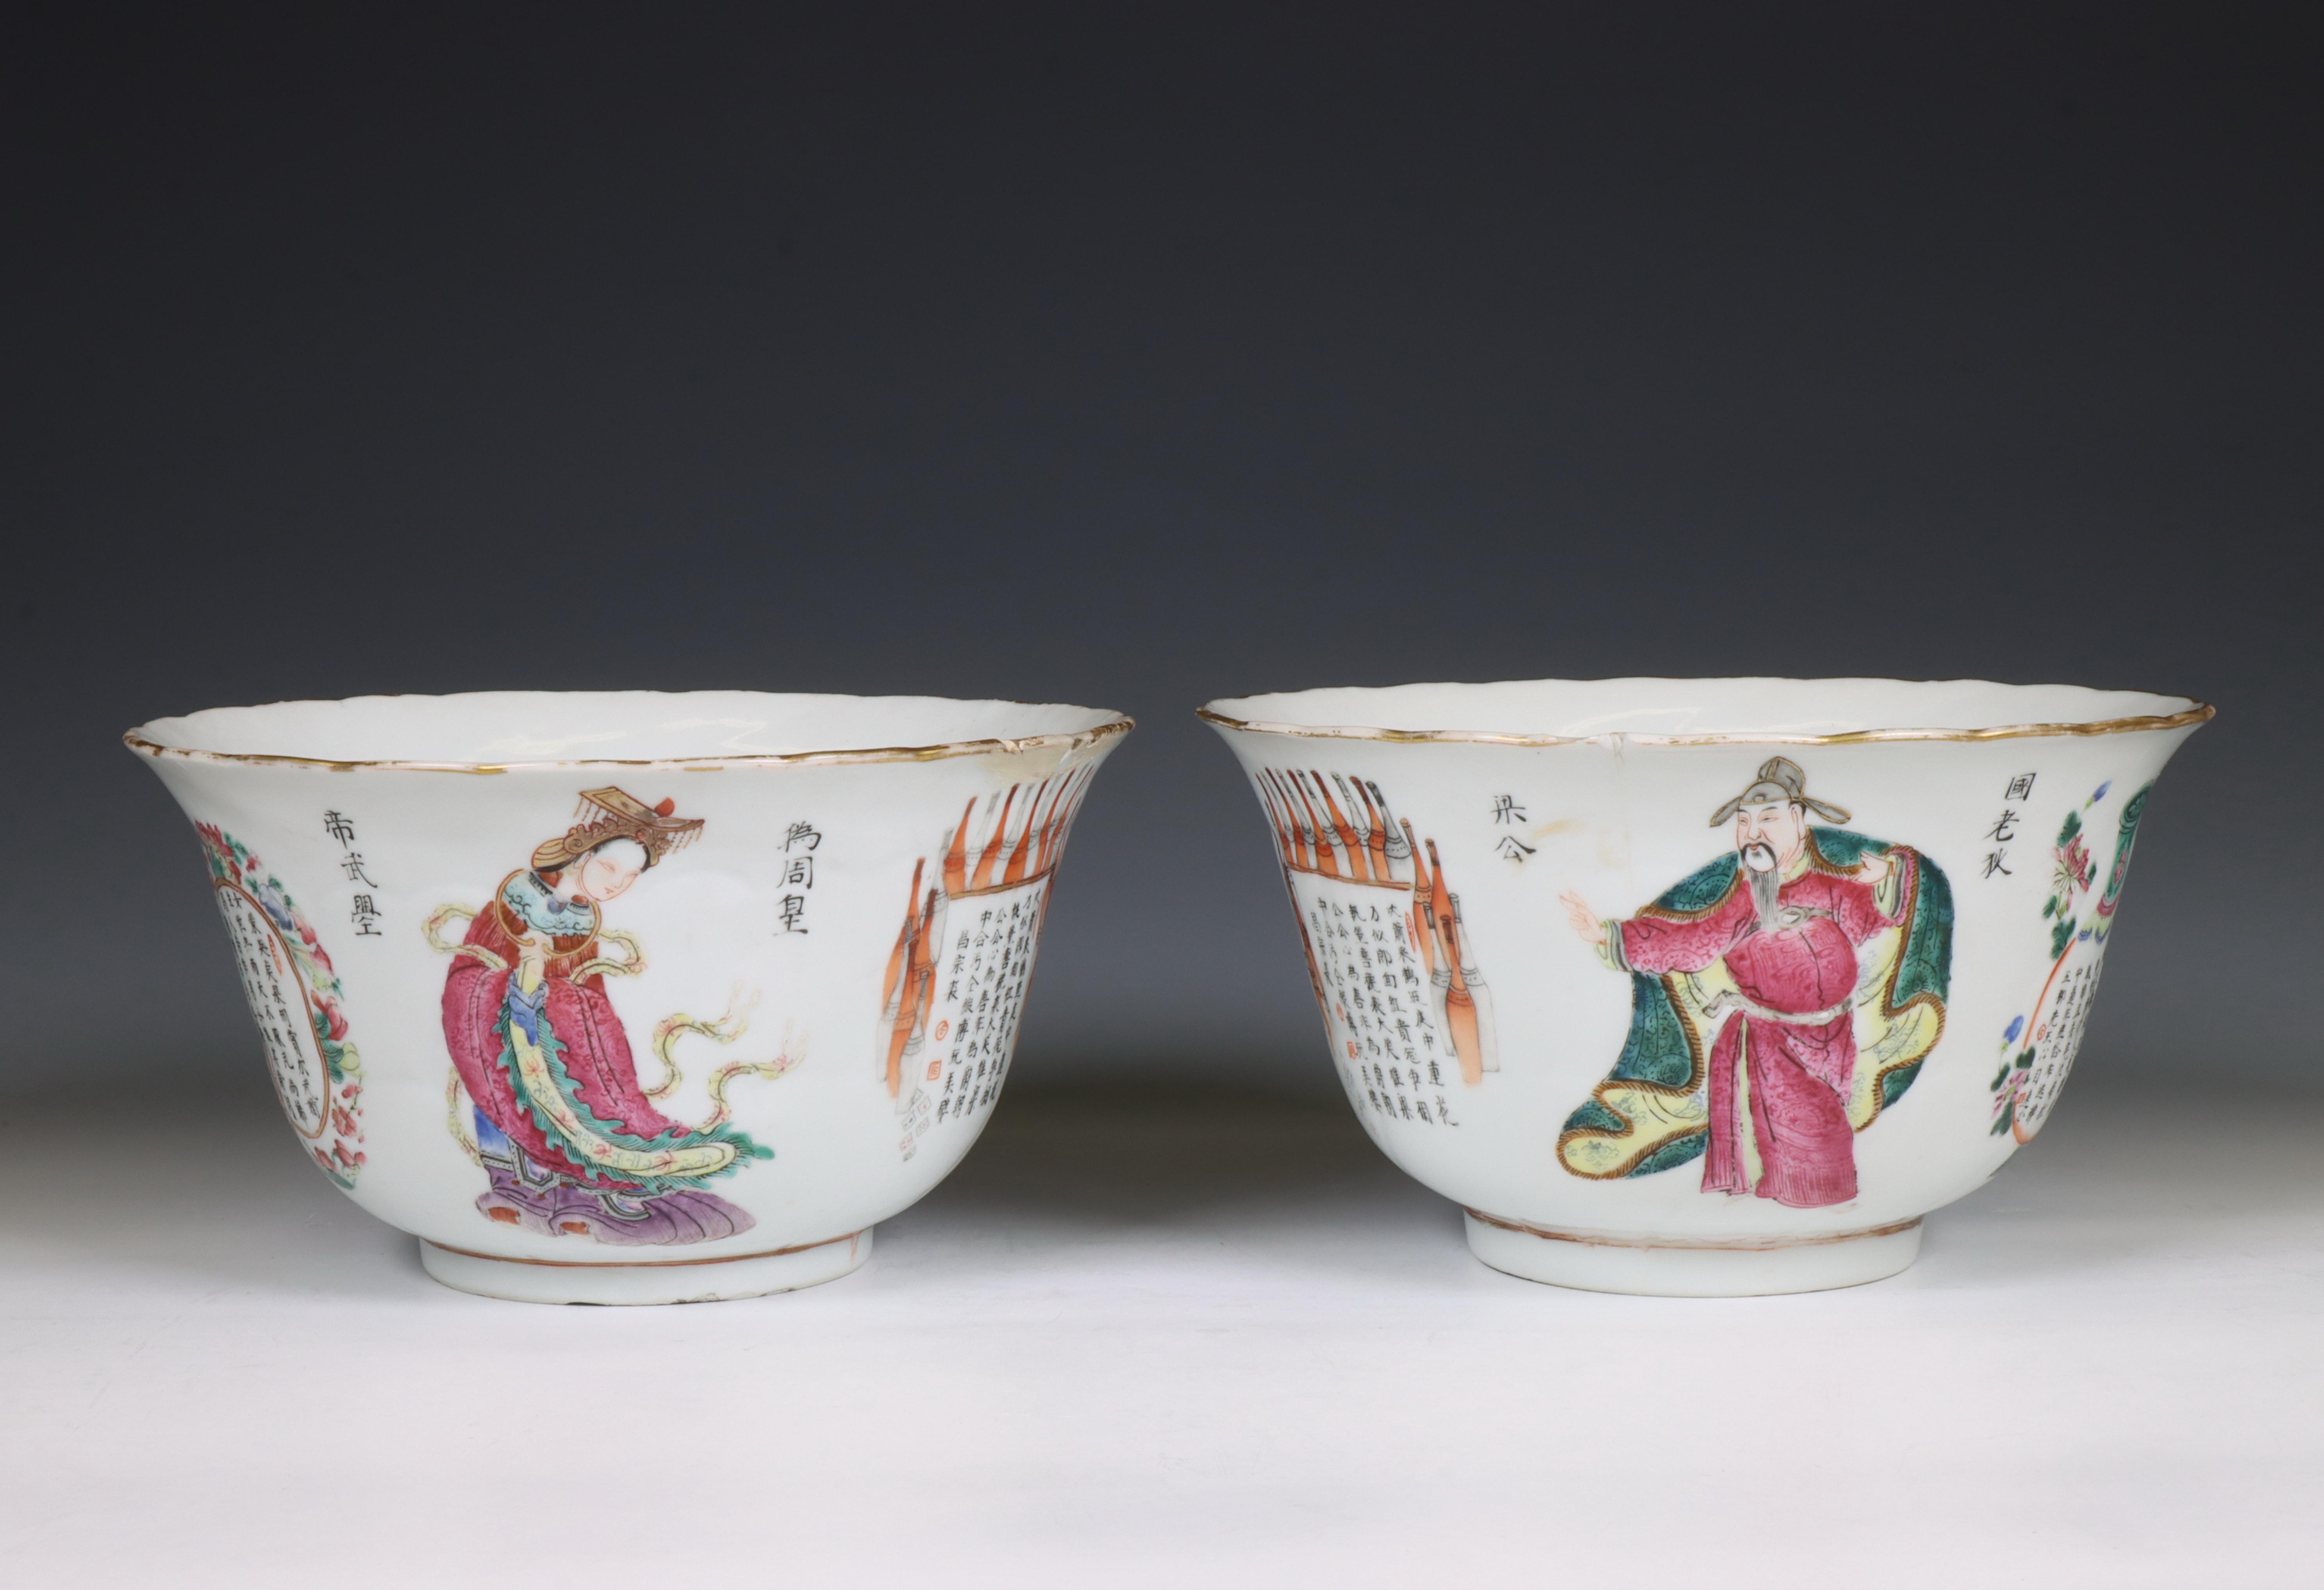 China, two famille rose porcelain 'Wu Shuang Pu' bowls, late Qing dynasty (1644-1912),